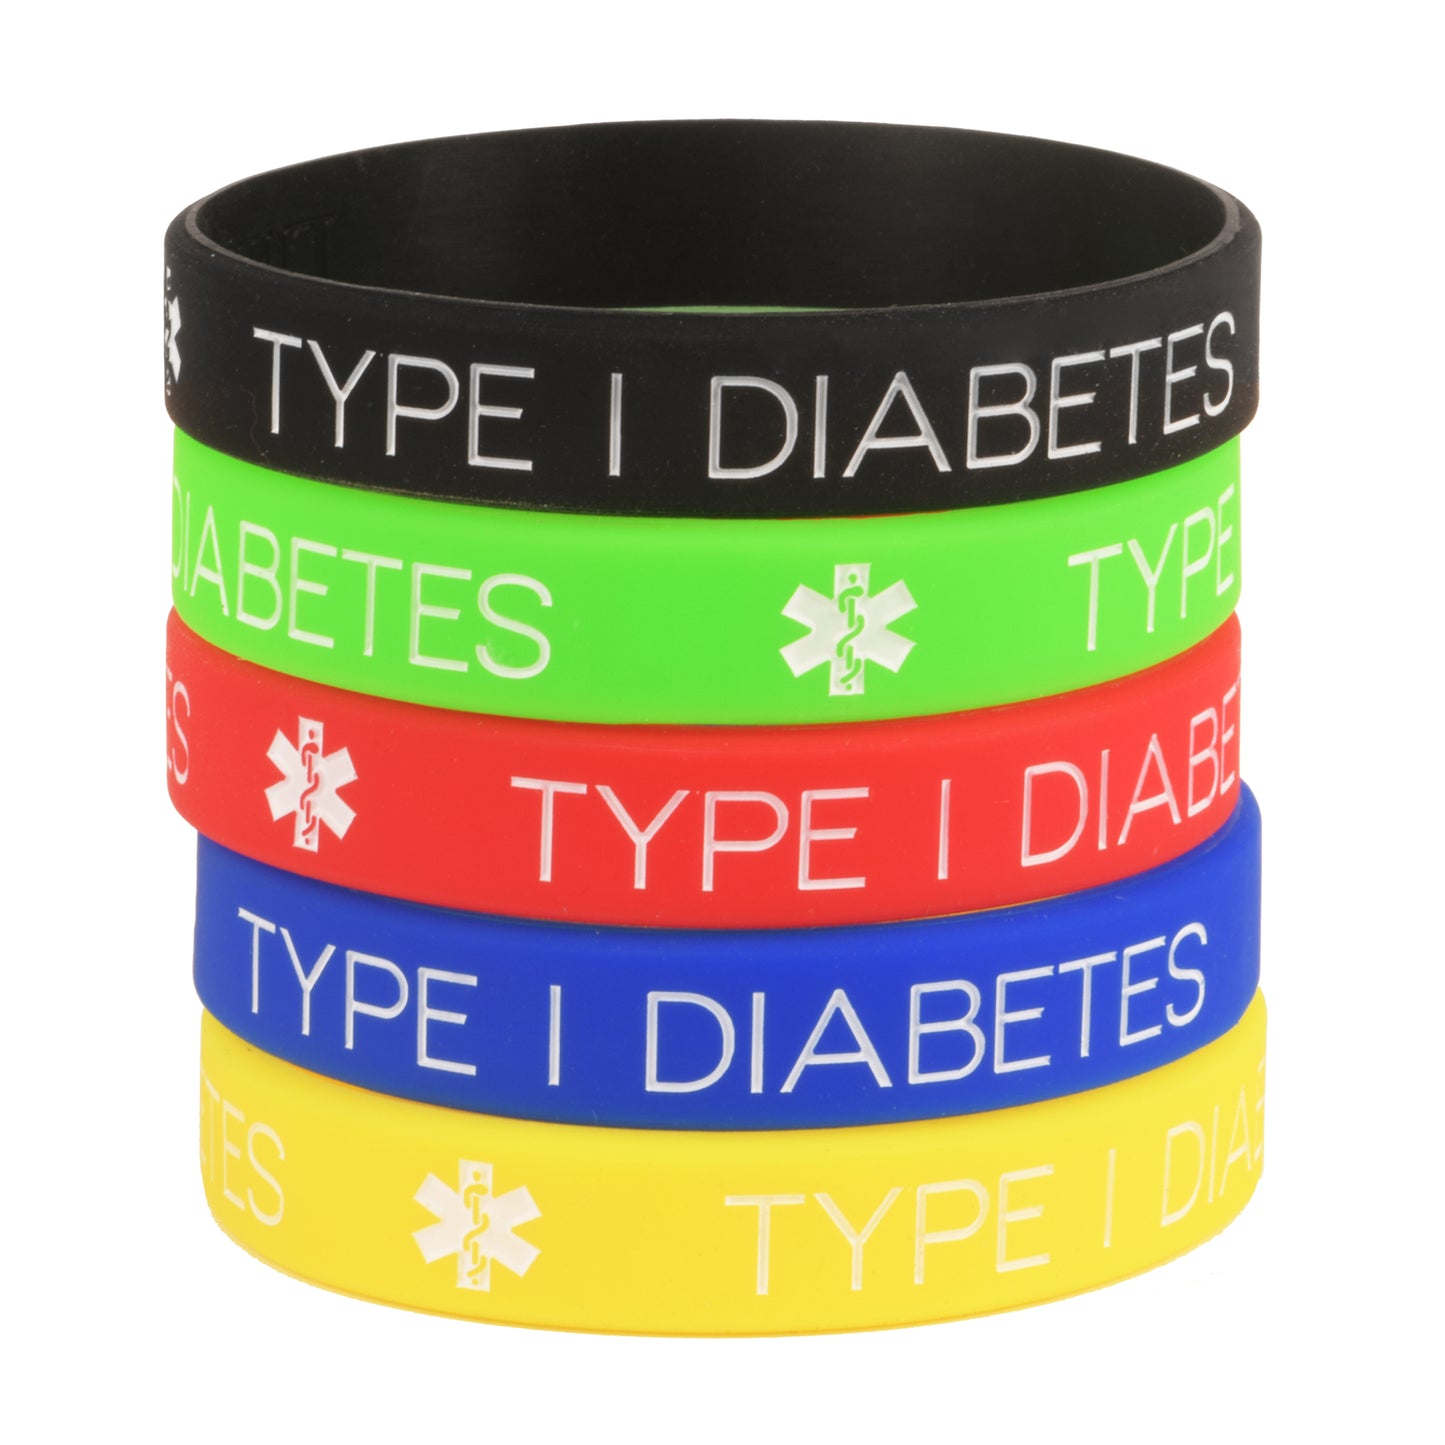 Type 1 Diabetes Bracelets Silicone Medical ID Wristbands (Pack of 5) One size for All